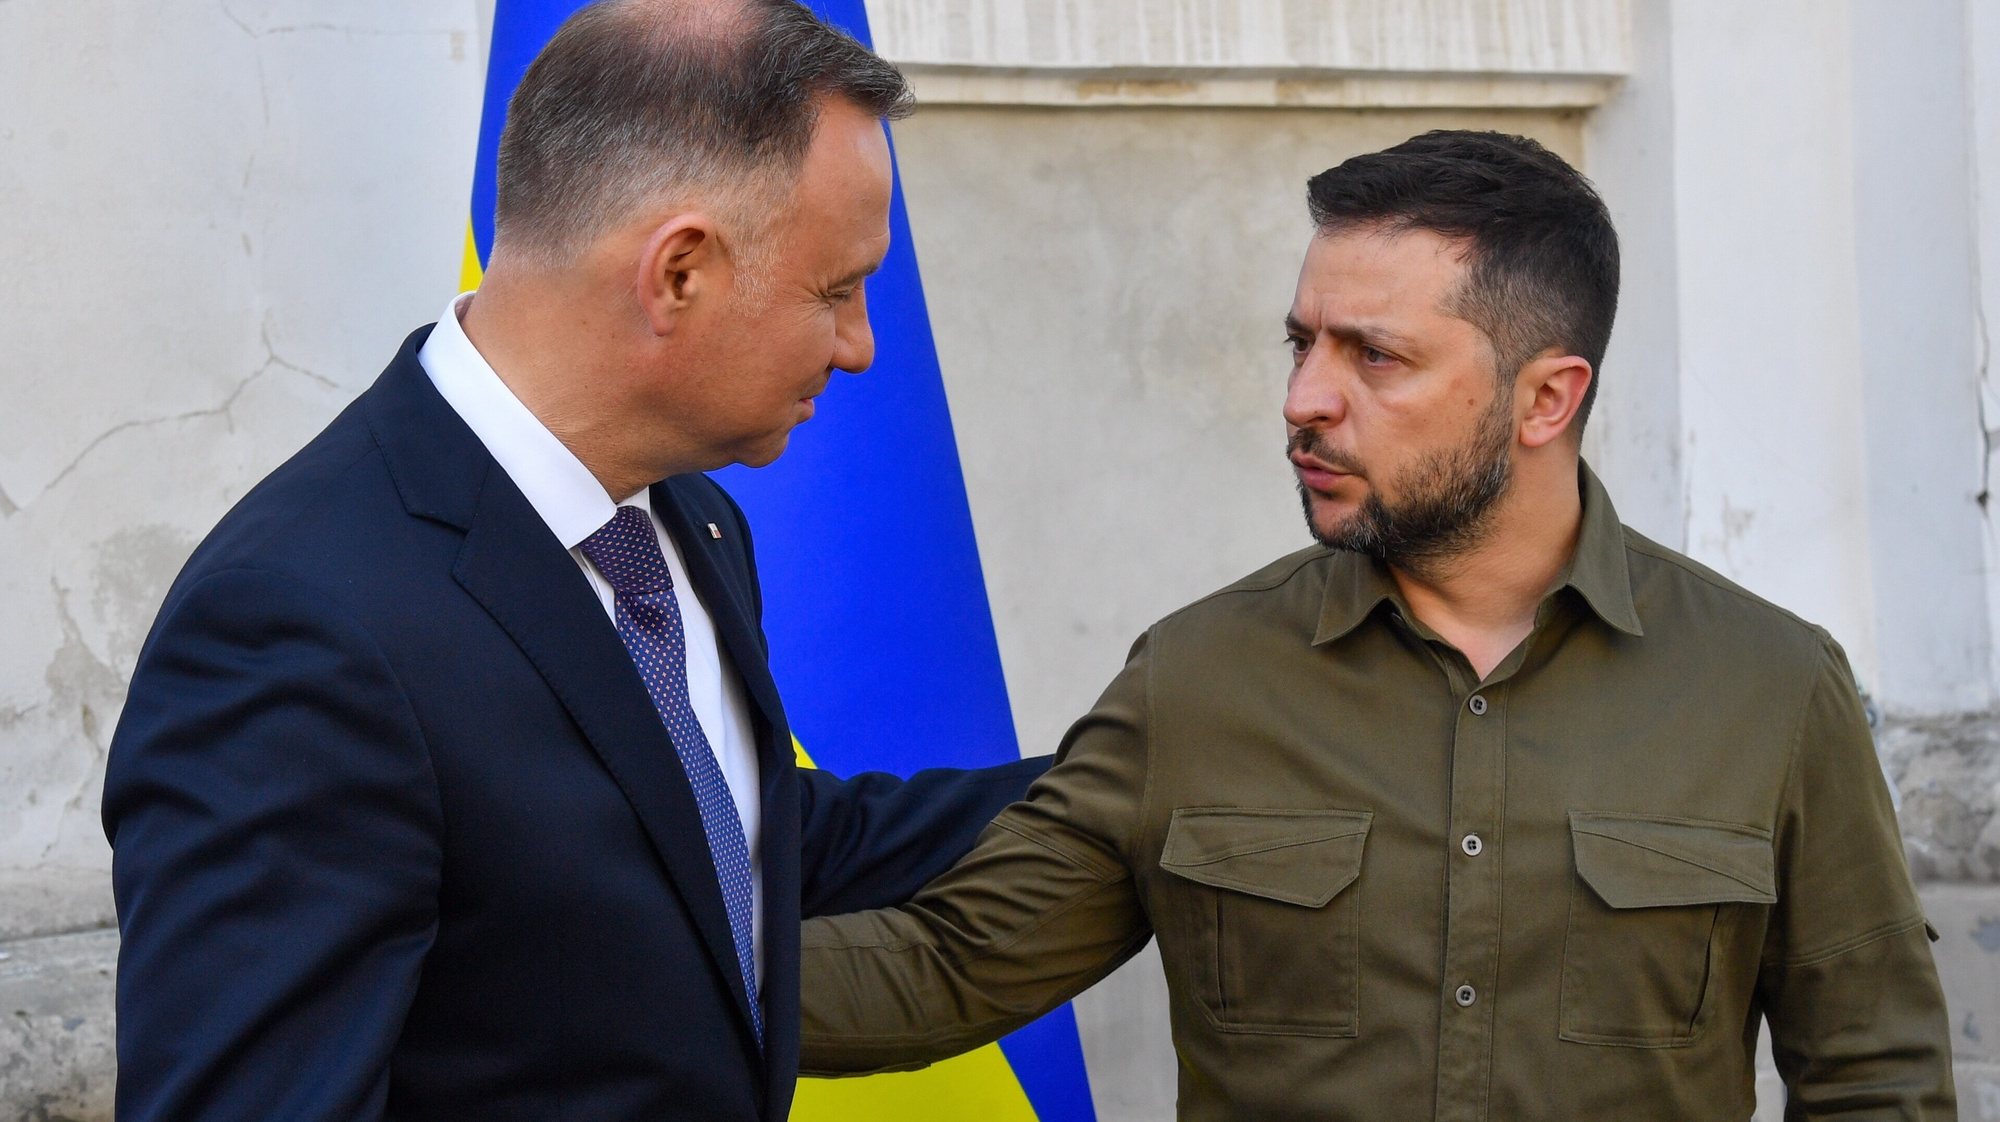 epa10735880 Polish President Andrzej Duda (L) and Ukrainian President Volodymyr Zelensky (R) at the Cathedral of the Holy Apostles Peter and Paul in Lutsk, Ukraine, 09 July 2023. The presidents jointly paid a tribute to the all the innocent Polish victims in Volyn during WWII, when units of the Ukrainian Insurgent Army committed mass murder of Polish citizens, on the 80th anniversary of the Volhynia massacre.  EPA/RADEK PIETRUSZKA POLAND OUT